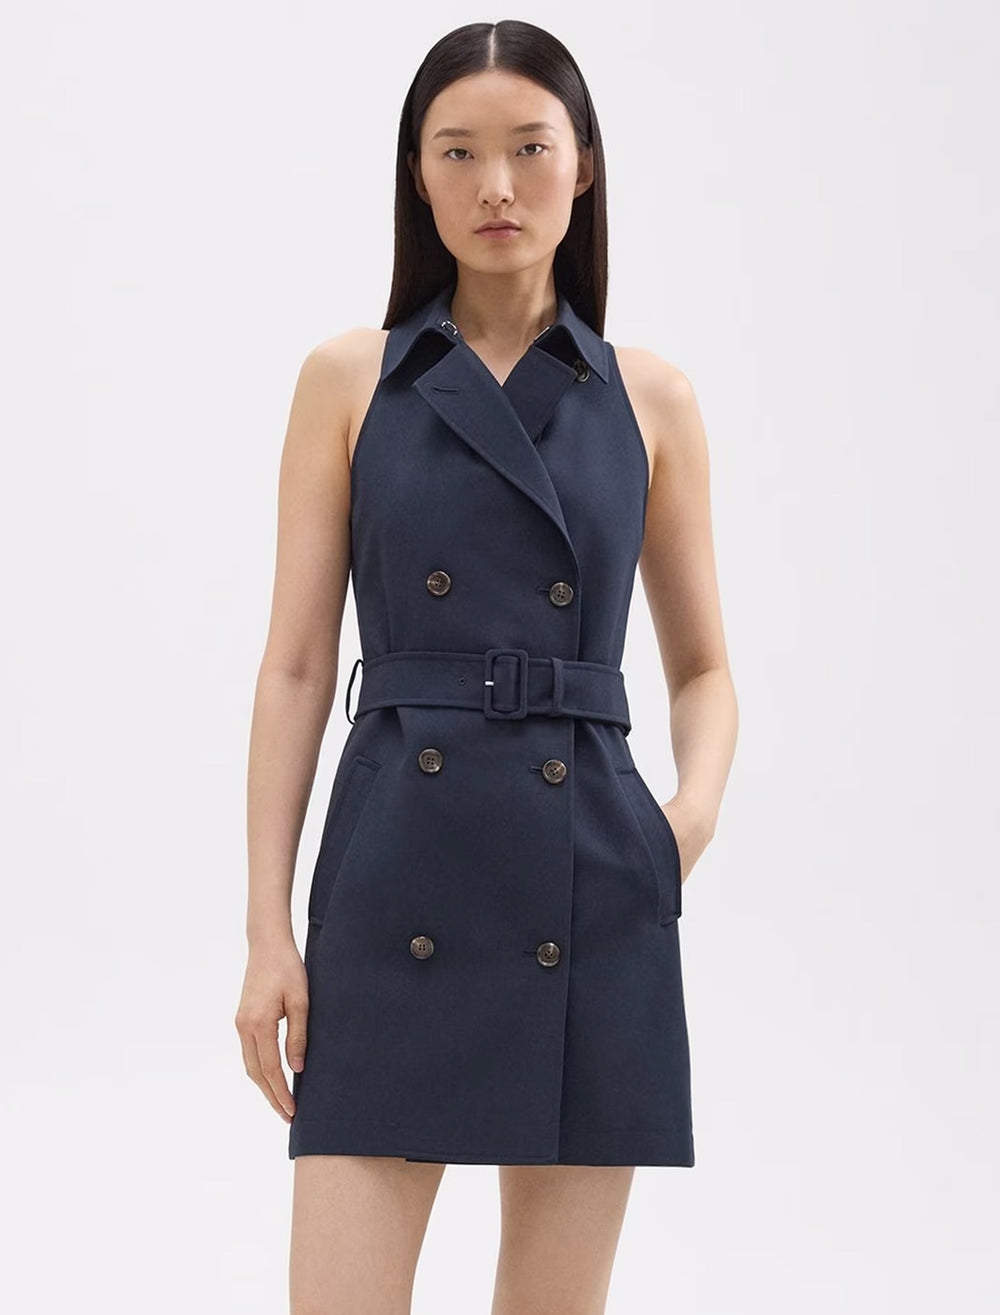 Model wearing Theory's halter trench dress in nocturne navy.